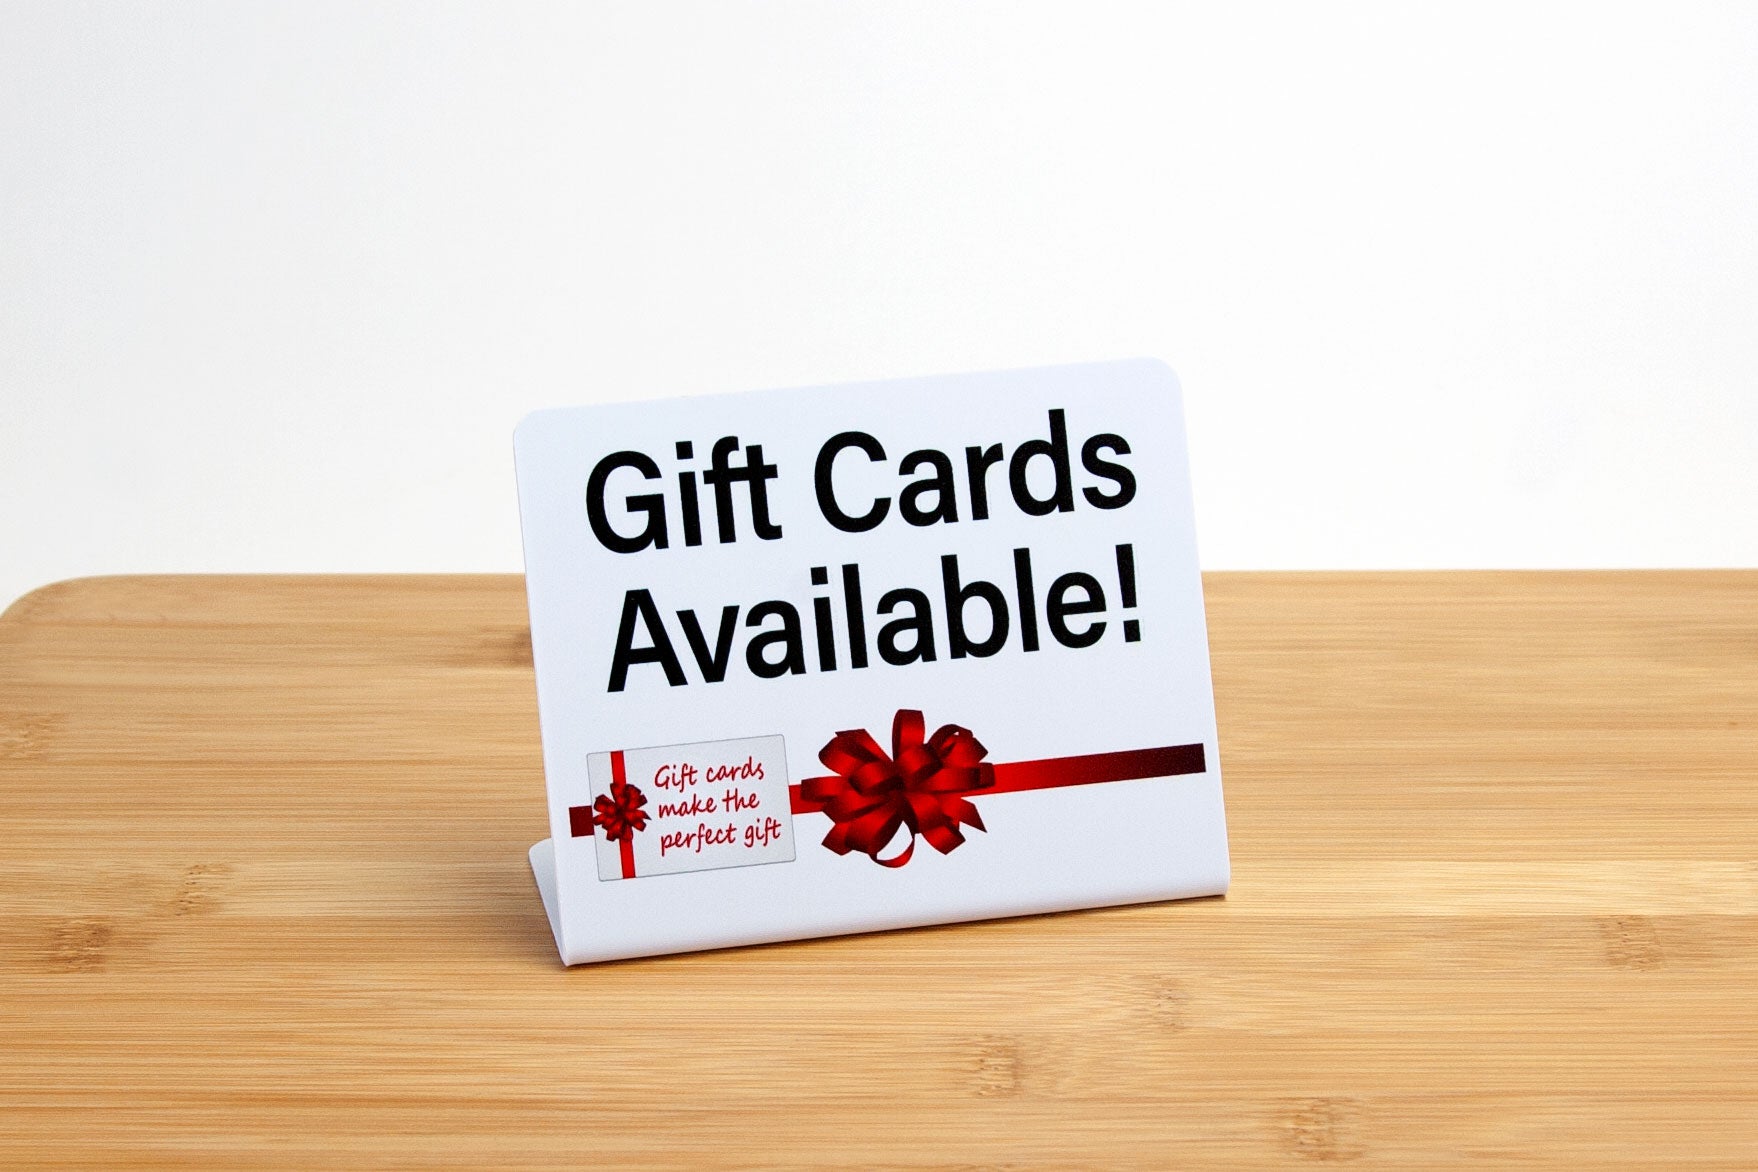  Specialty Gift Cards: Gift Cards